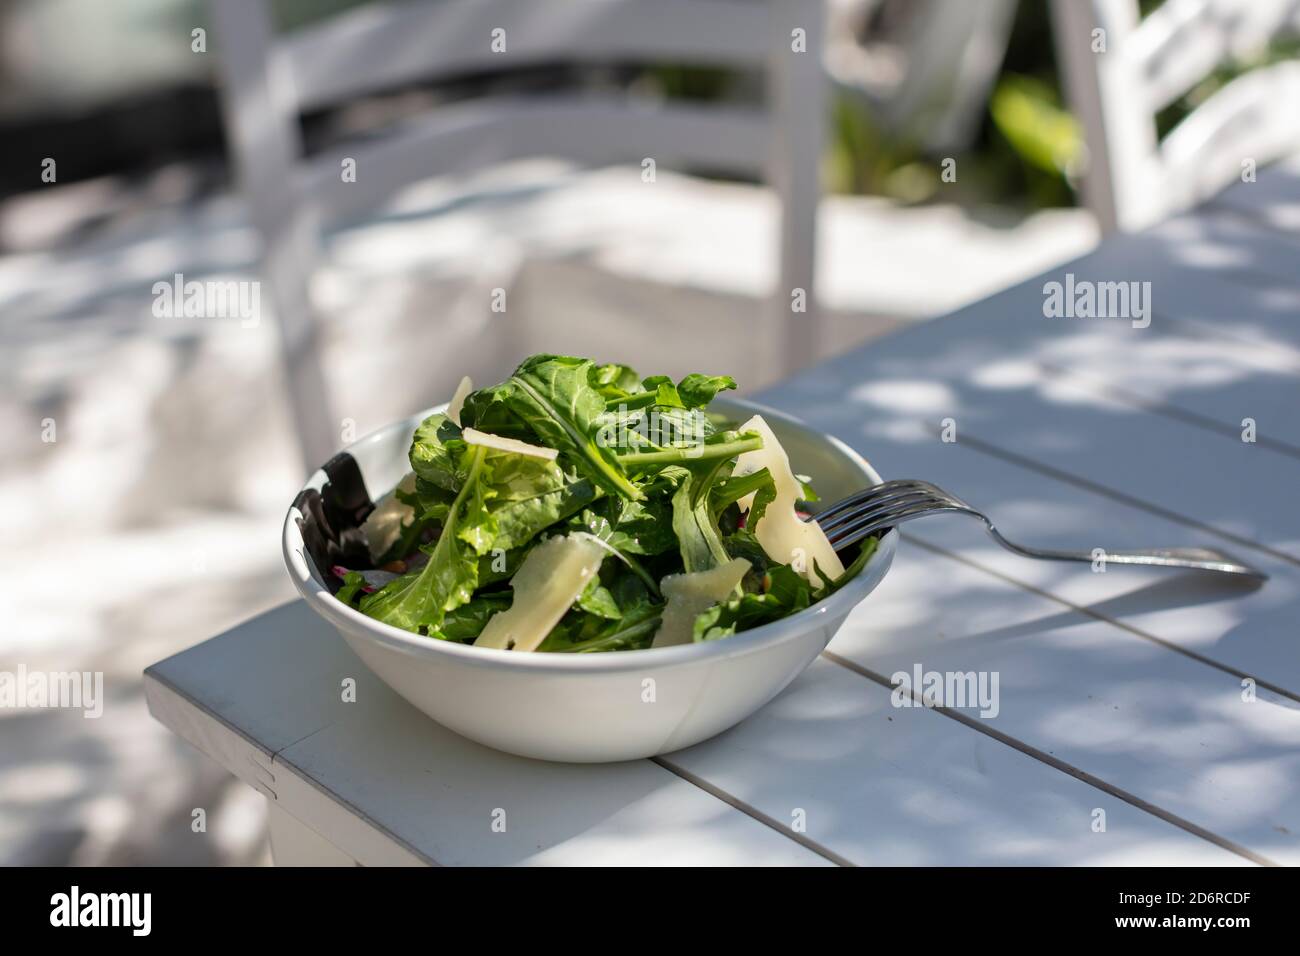 Fresh Green Salad with Cheese at Garden Stock Photo